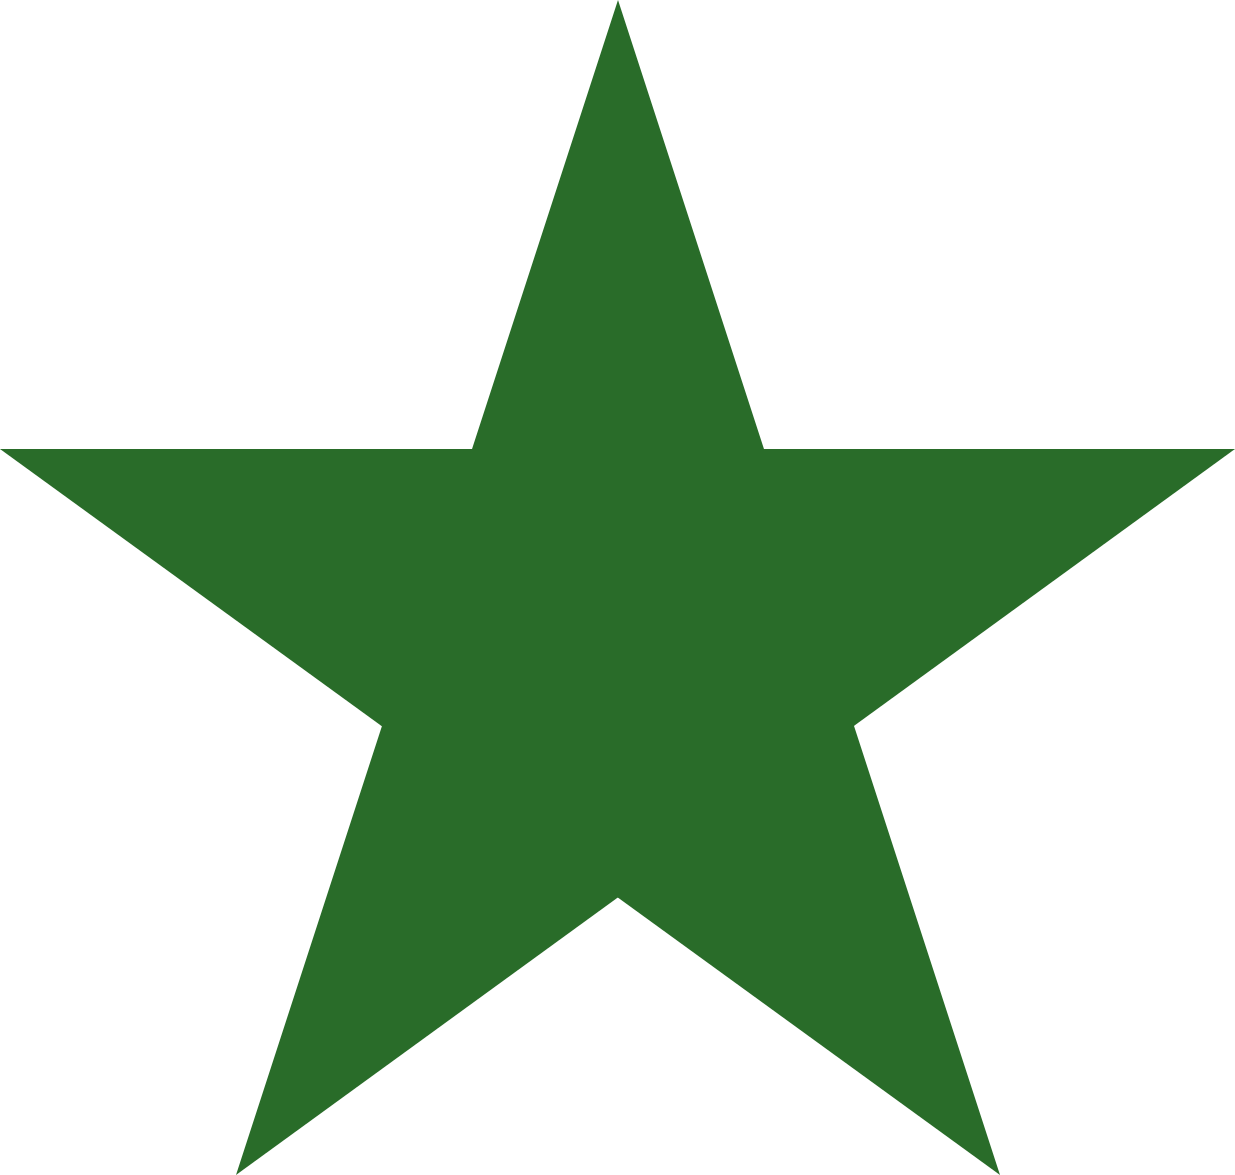 Green Star Vector Graphic PNG